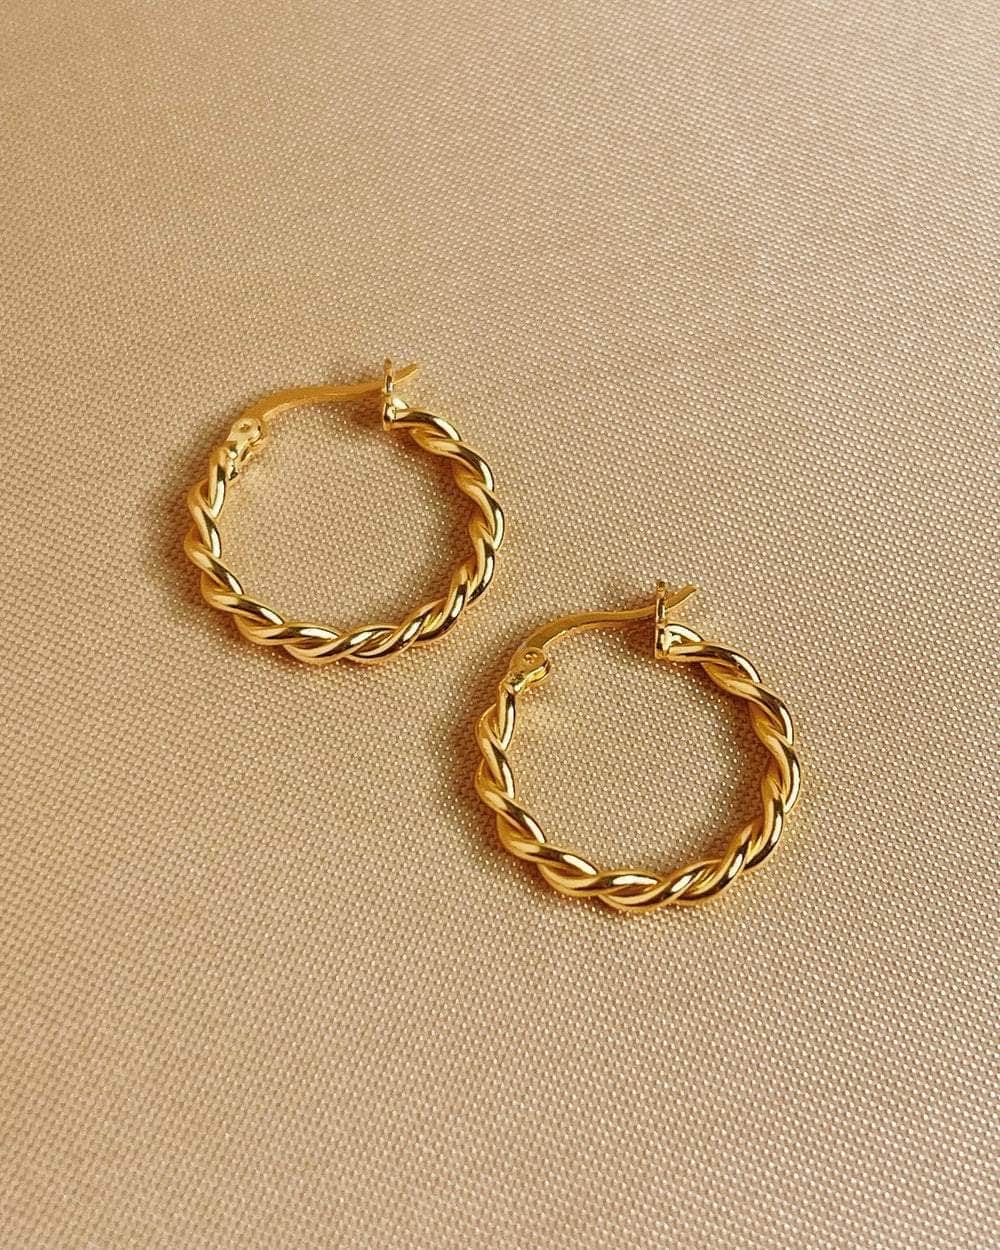 So Dainty Co. Huggies / Hoops Sophia Gold Hoops Gold Plated 925 Sterling Silver Jewelry